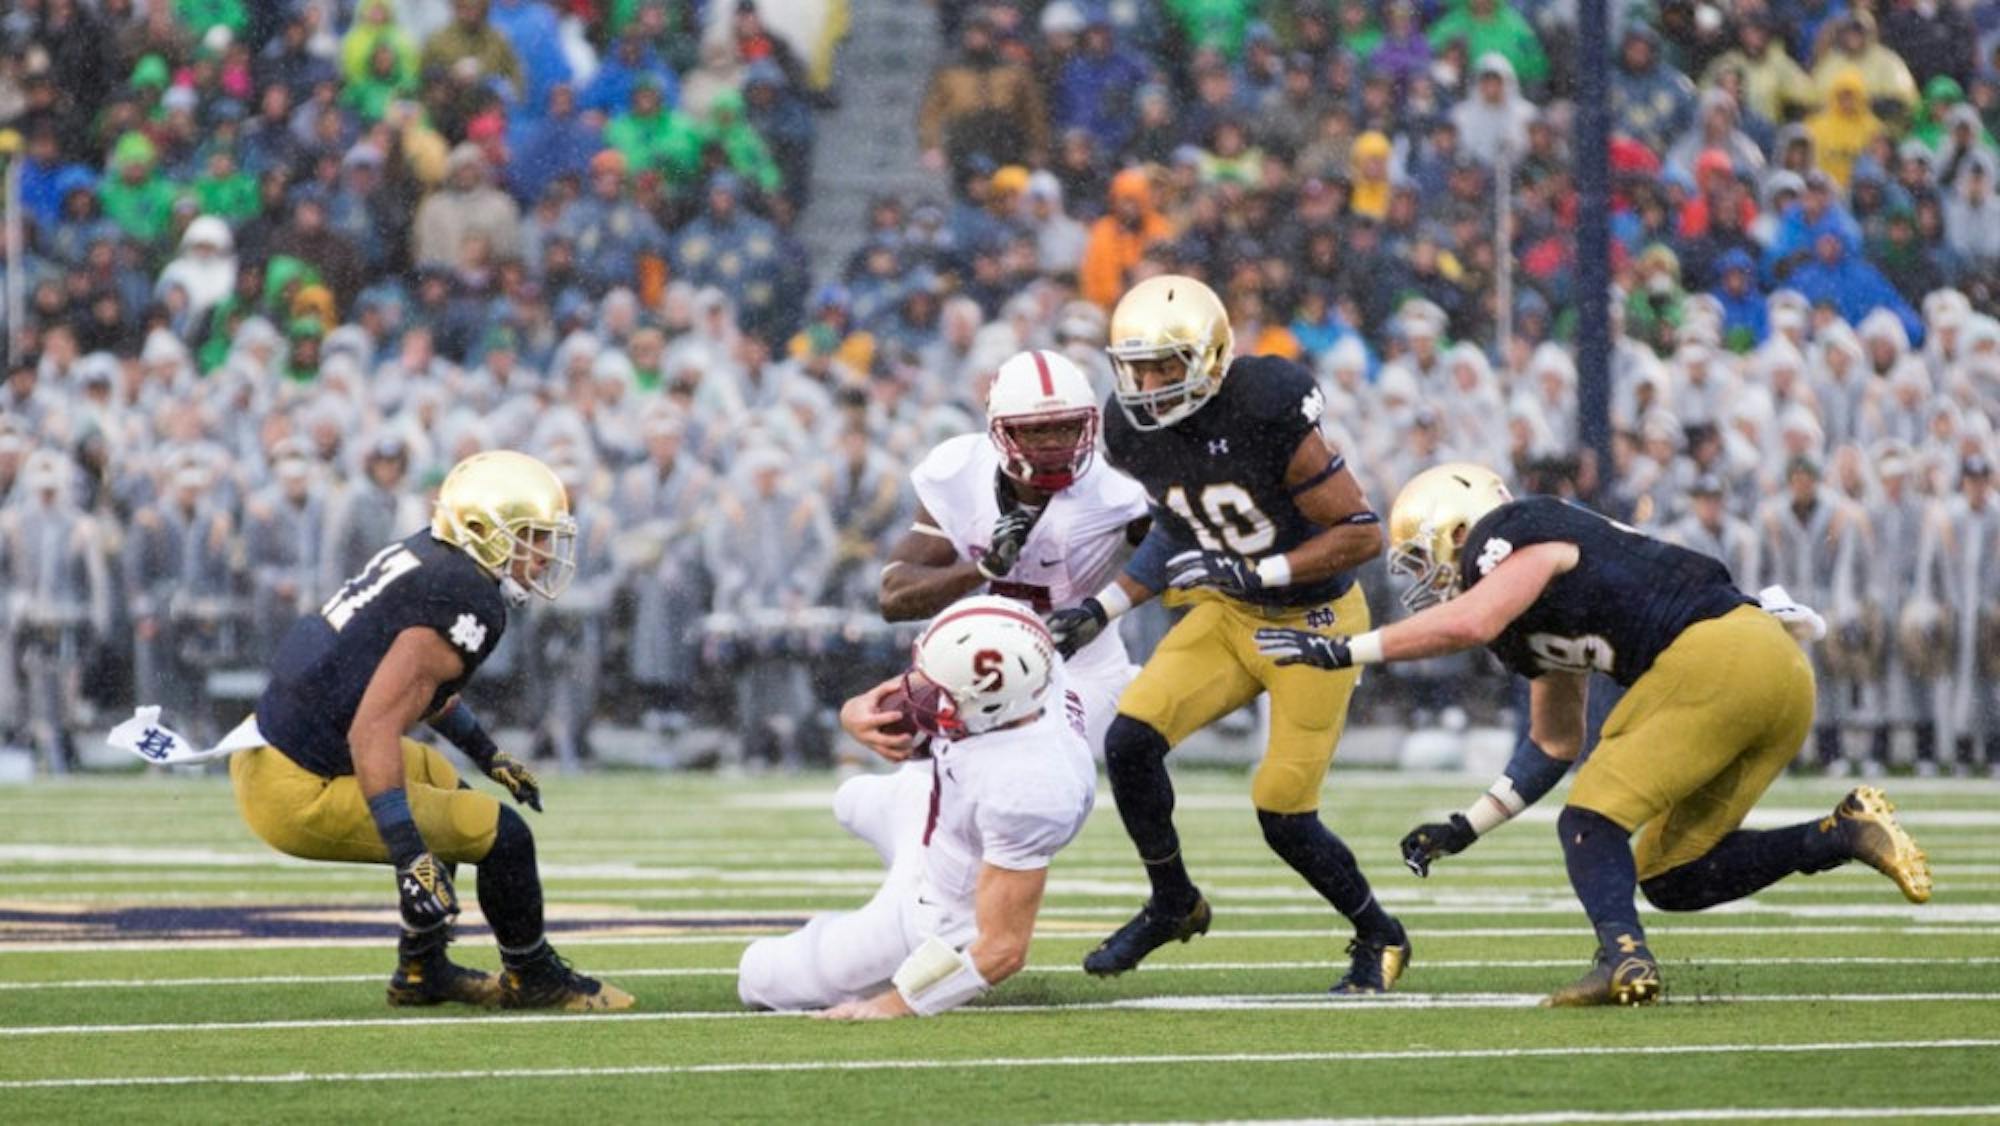 20141004, 2014-2015, 20141004, Football, Golson, Kevin Song, Notre Dame Stadium, Redfield, vs Stanford